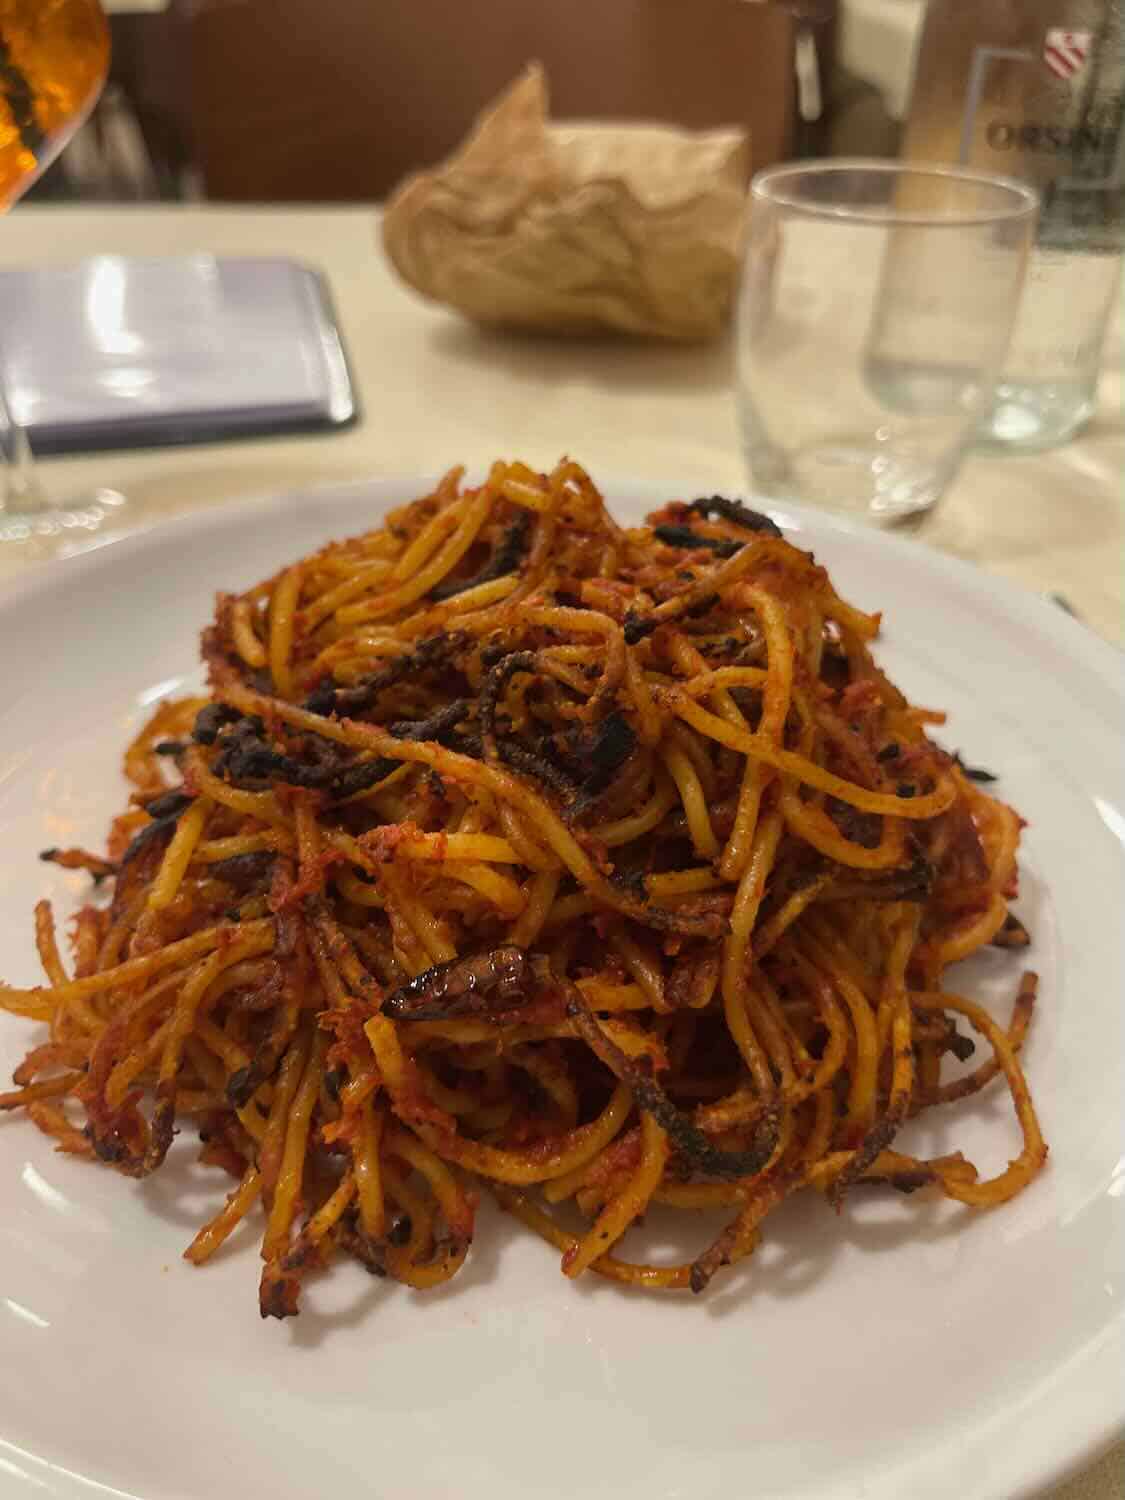 A plate of pasta with a rich tomato-based sauce served in Bari, Italy. The pasta is arranged in a heap on a white plate, with a glass and a bottle of water visible in the background.